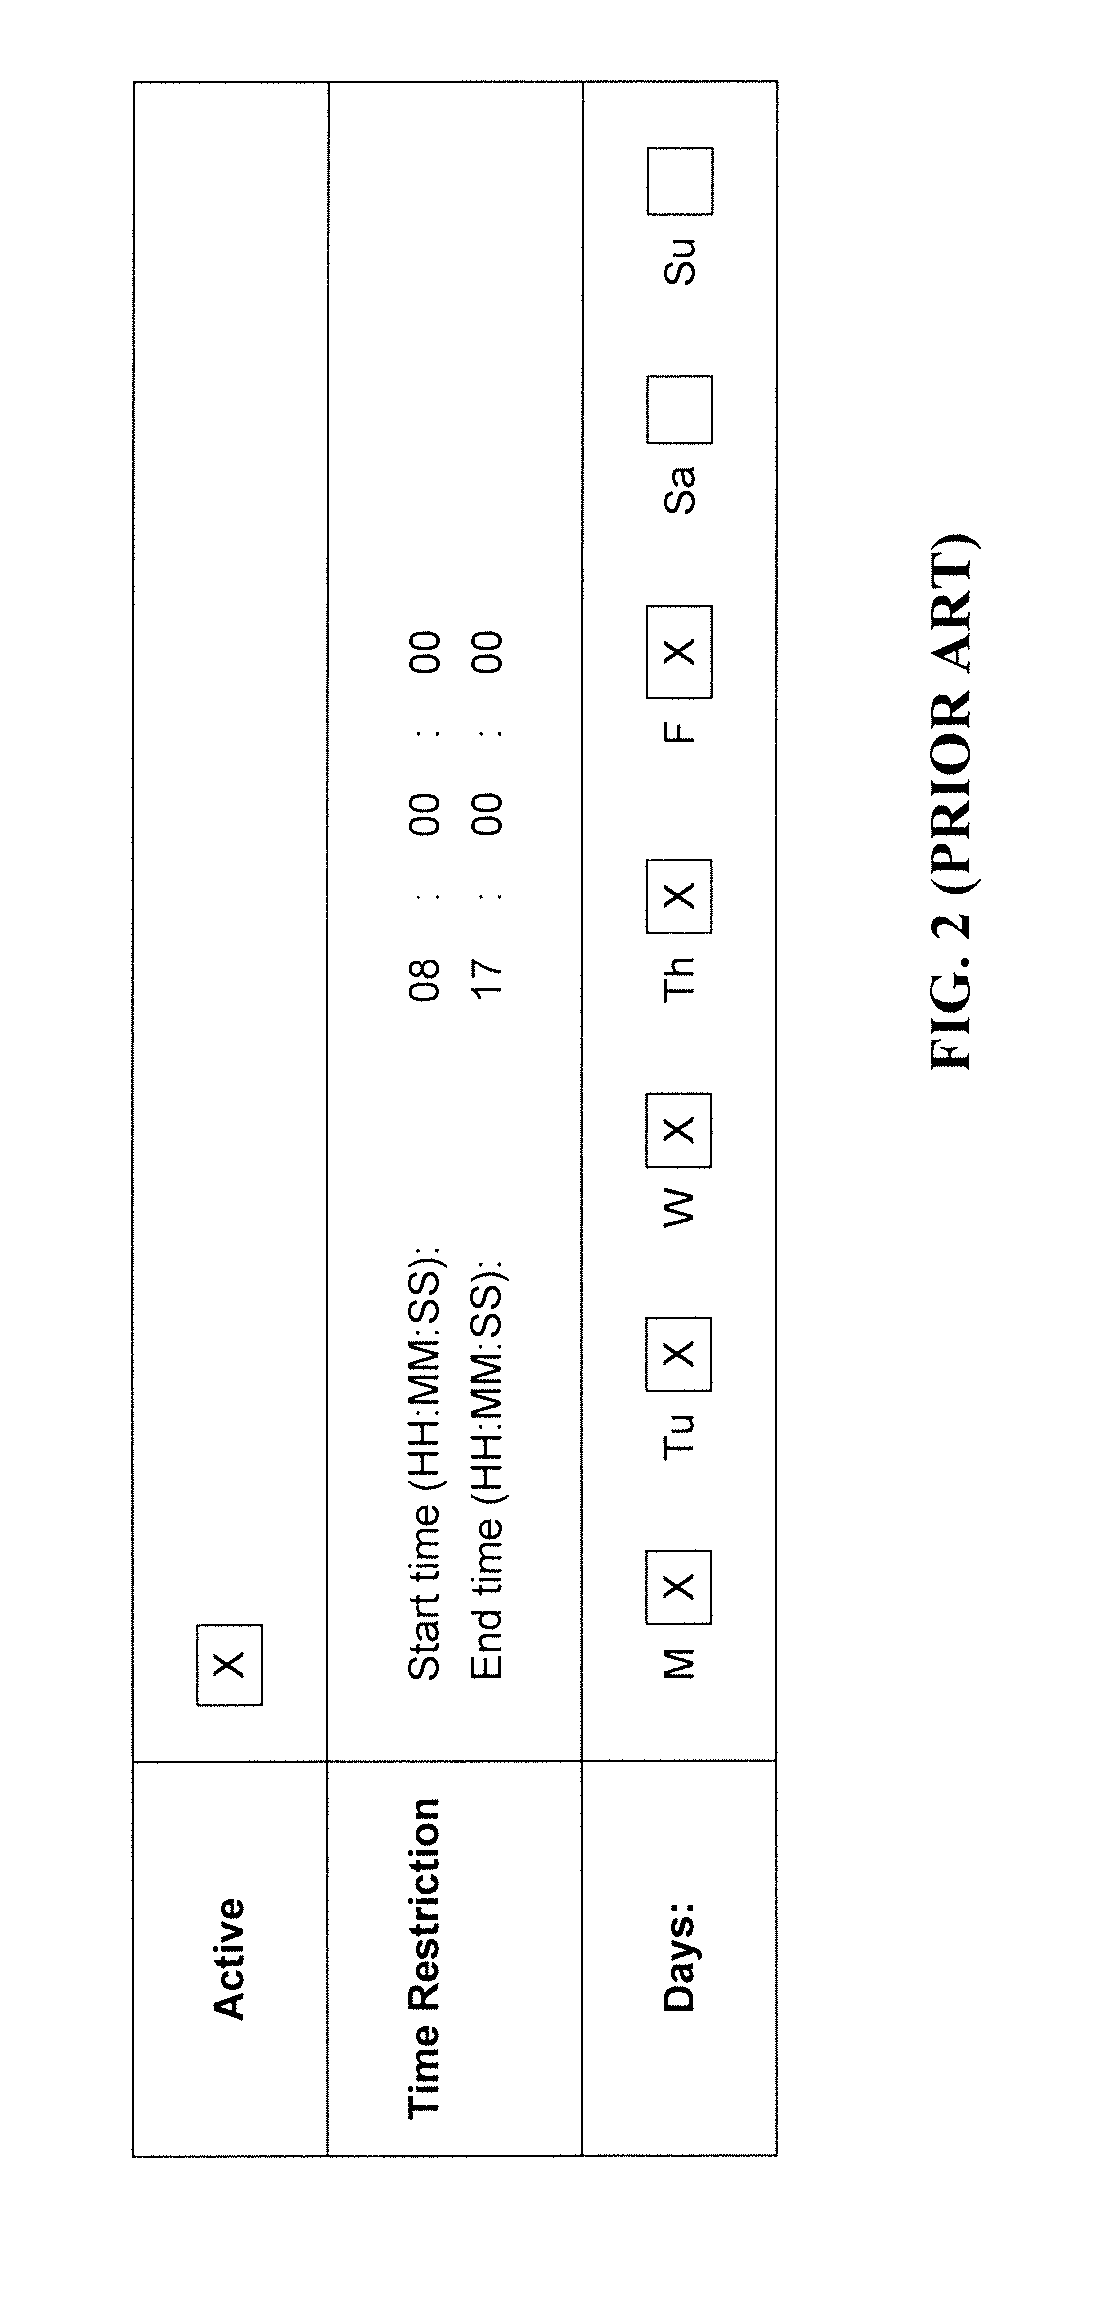 System and method for dynamically monitoring status in location services